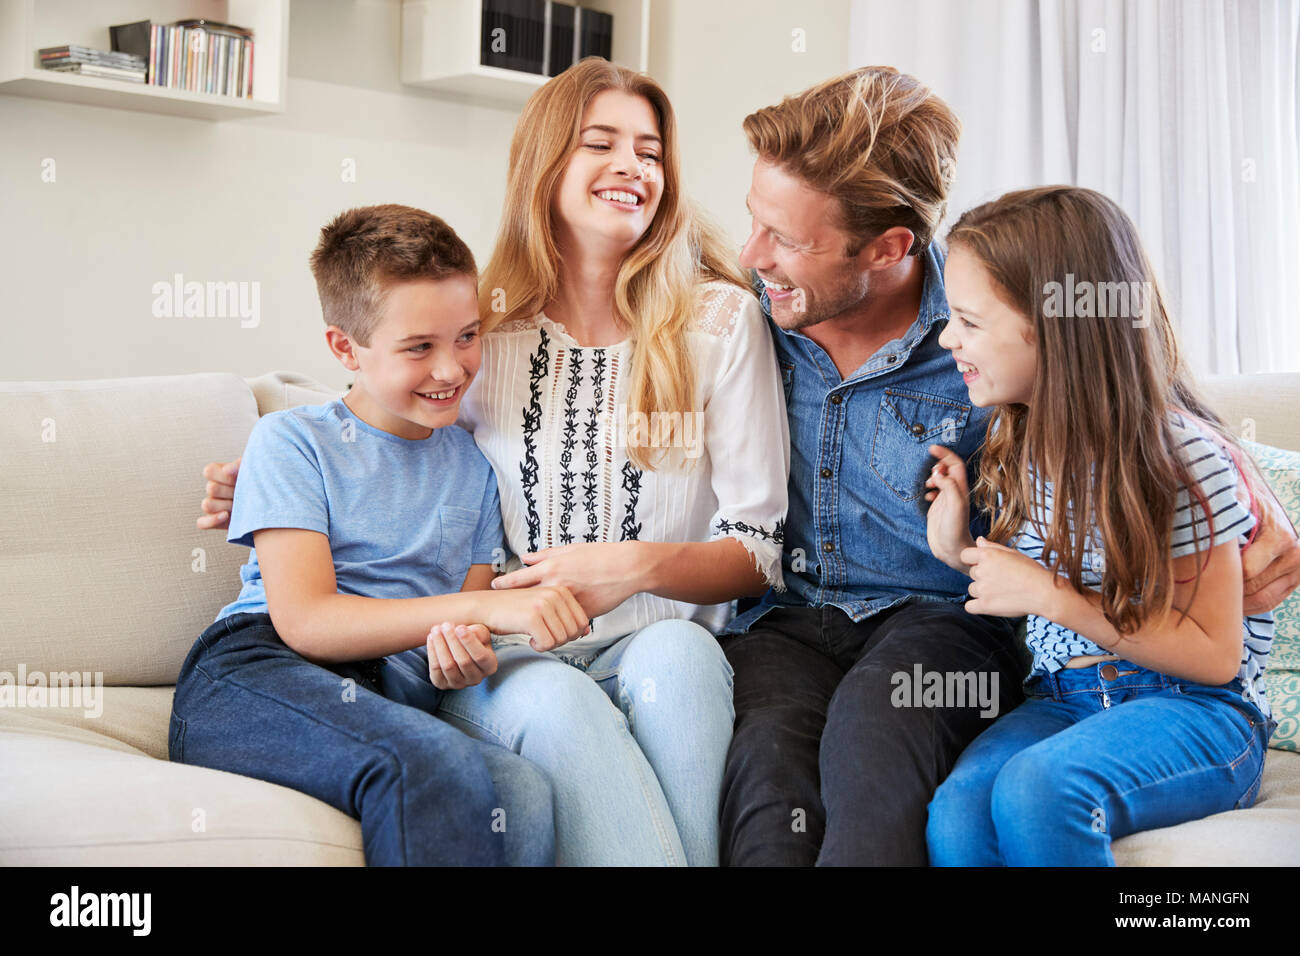 Smiling Family Relaxing On Sofa At Home Together Banque D'Images